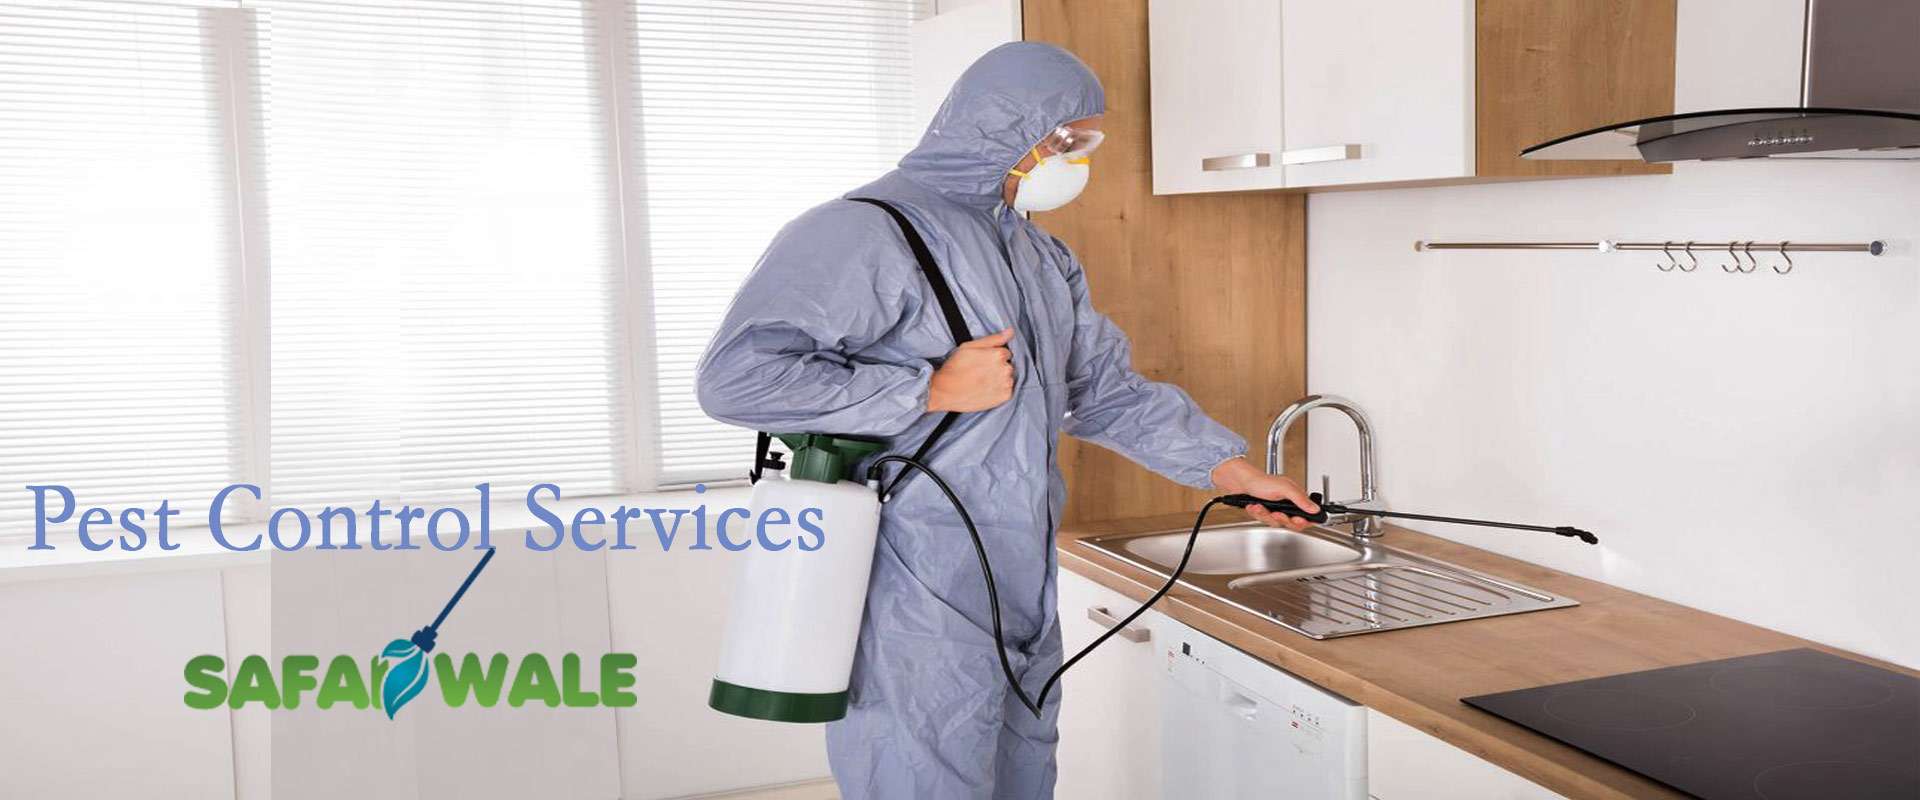 Pest Control Services In Ghodbunder Road, Thane